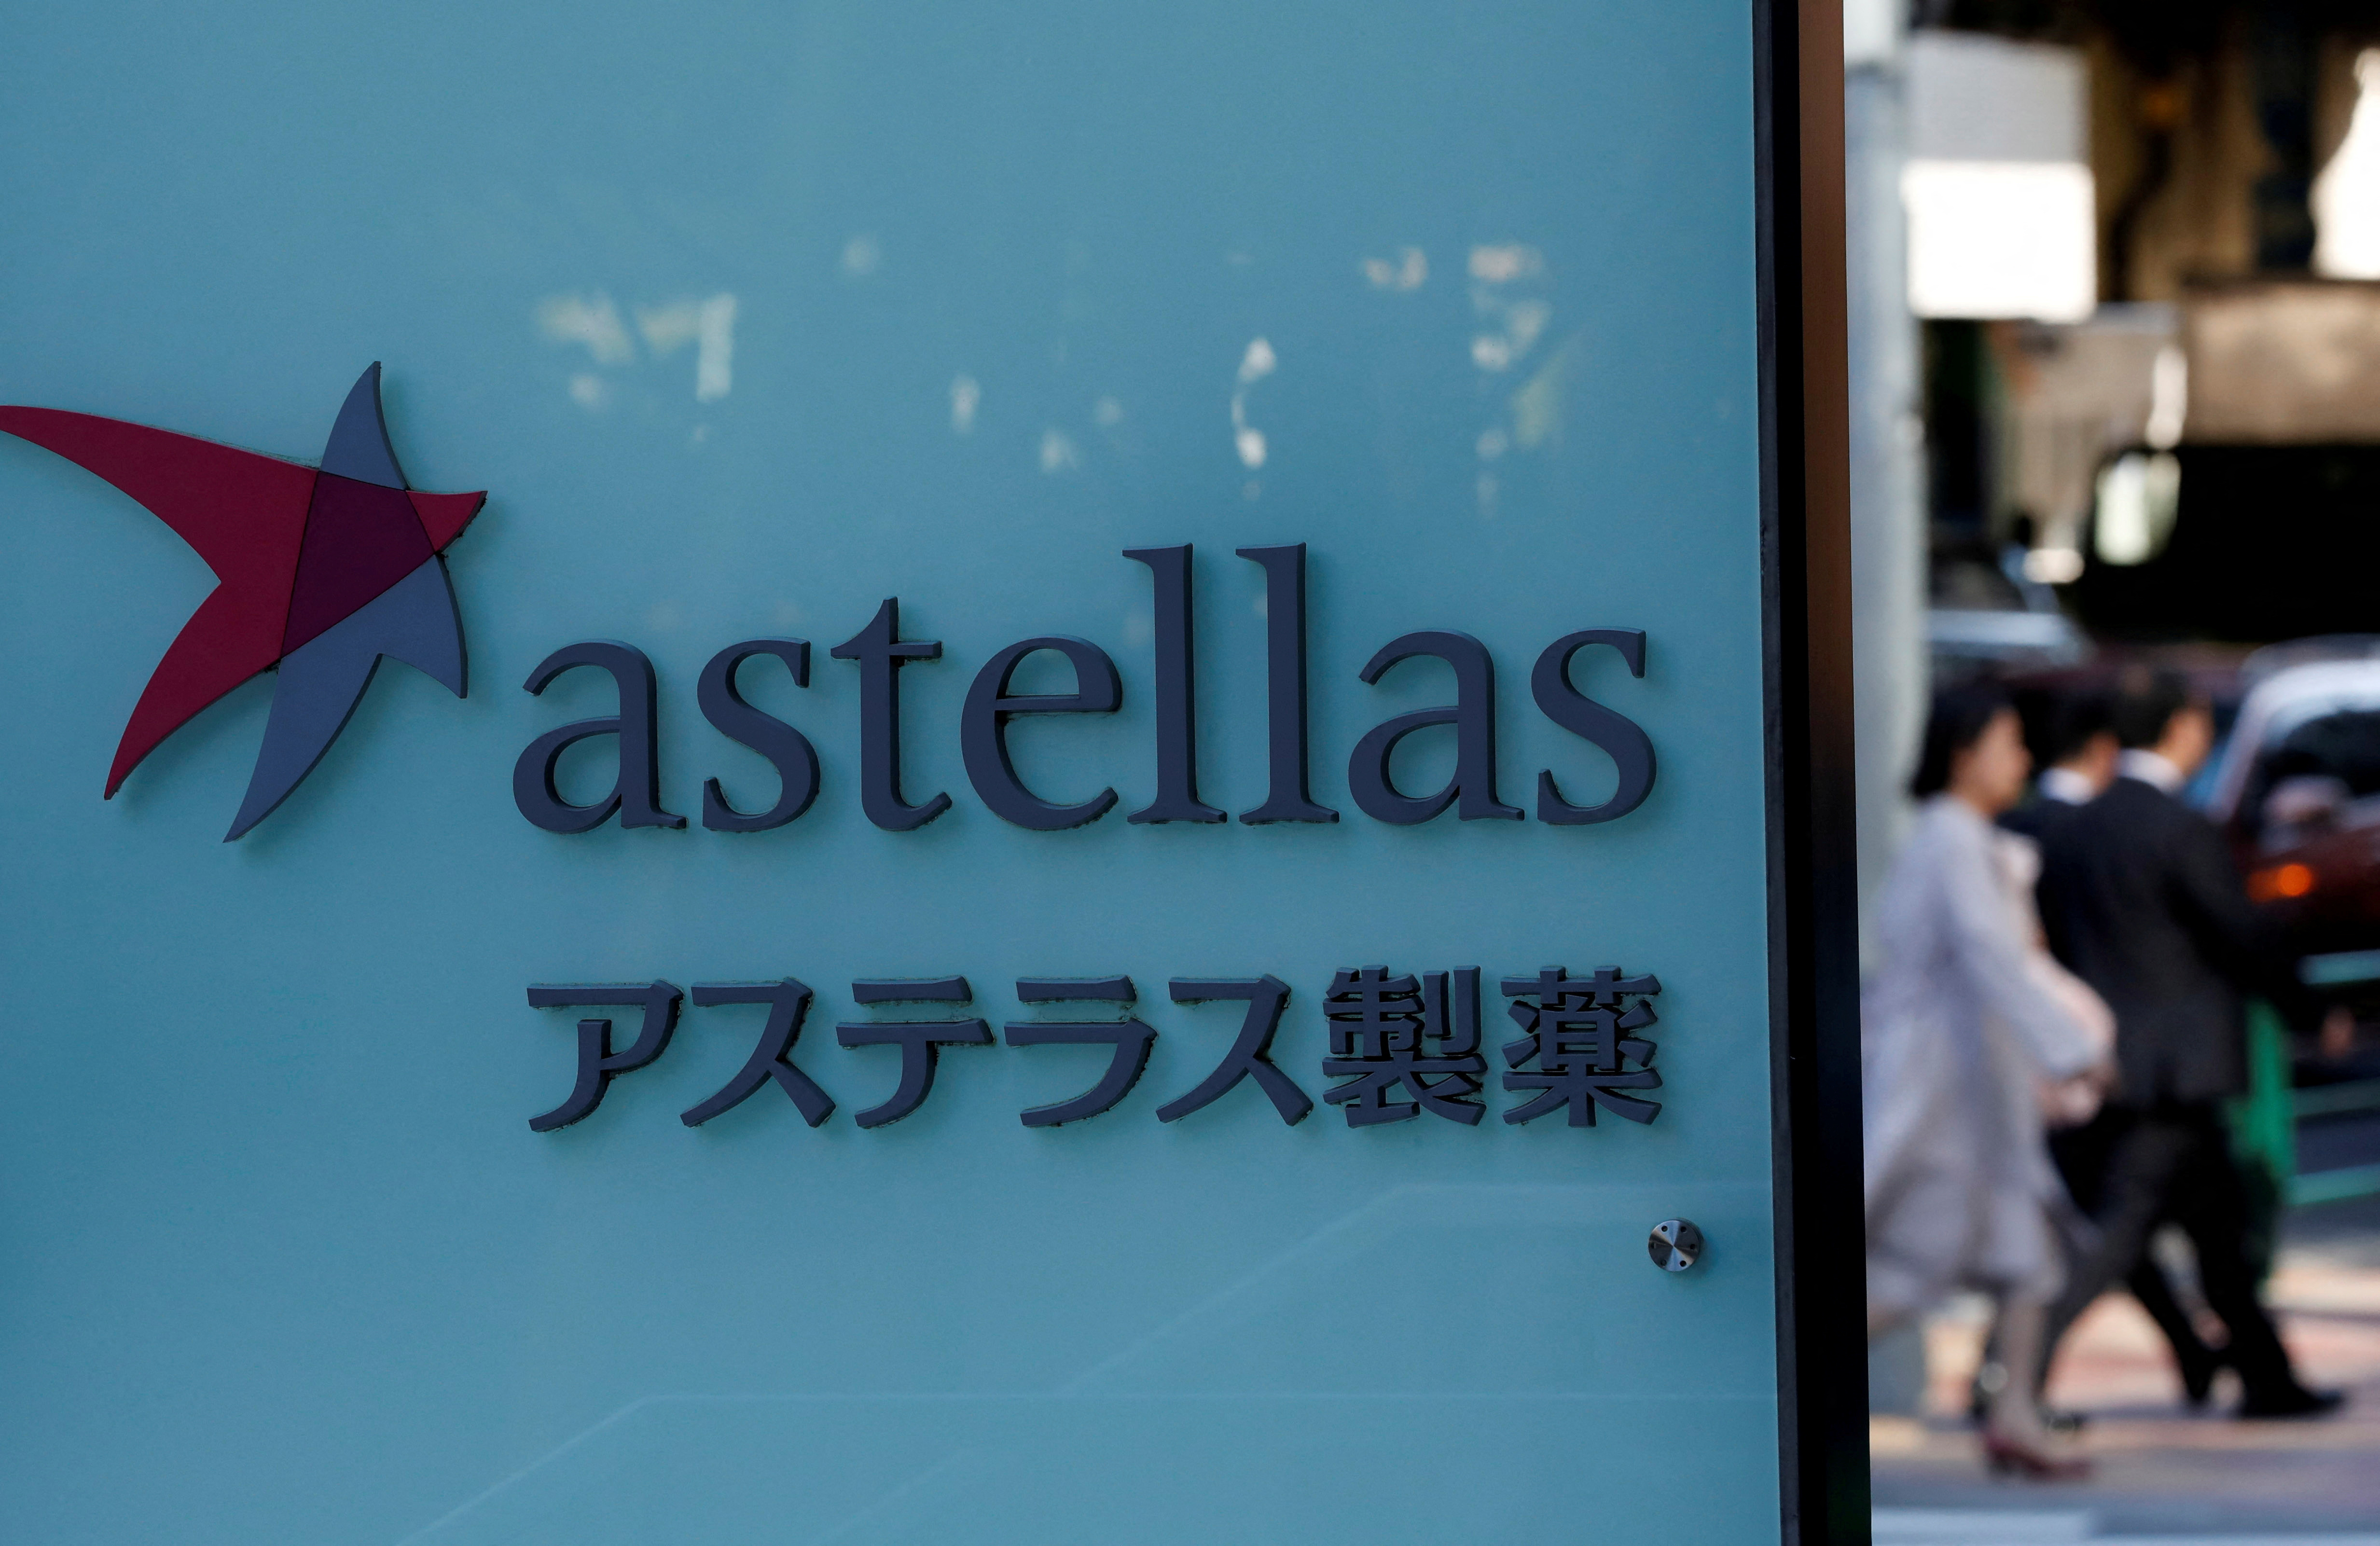 Japan's Astellas to buy Iveric Bio for $5.9 bln to expand eyesight treatments